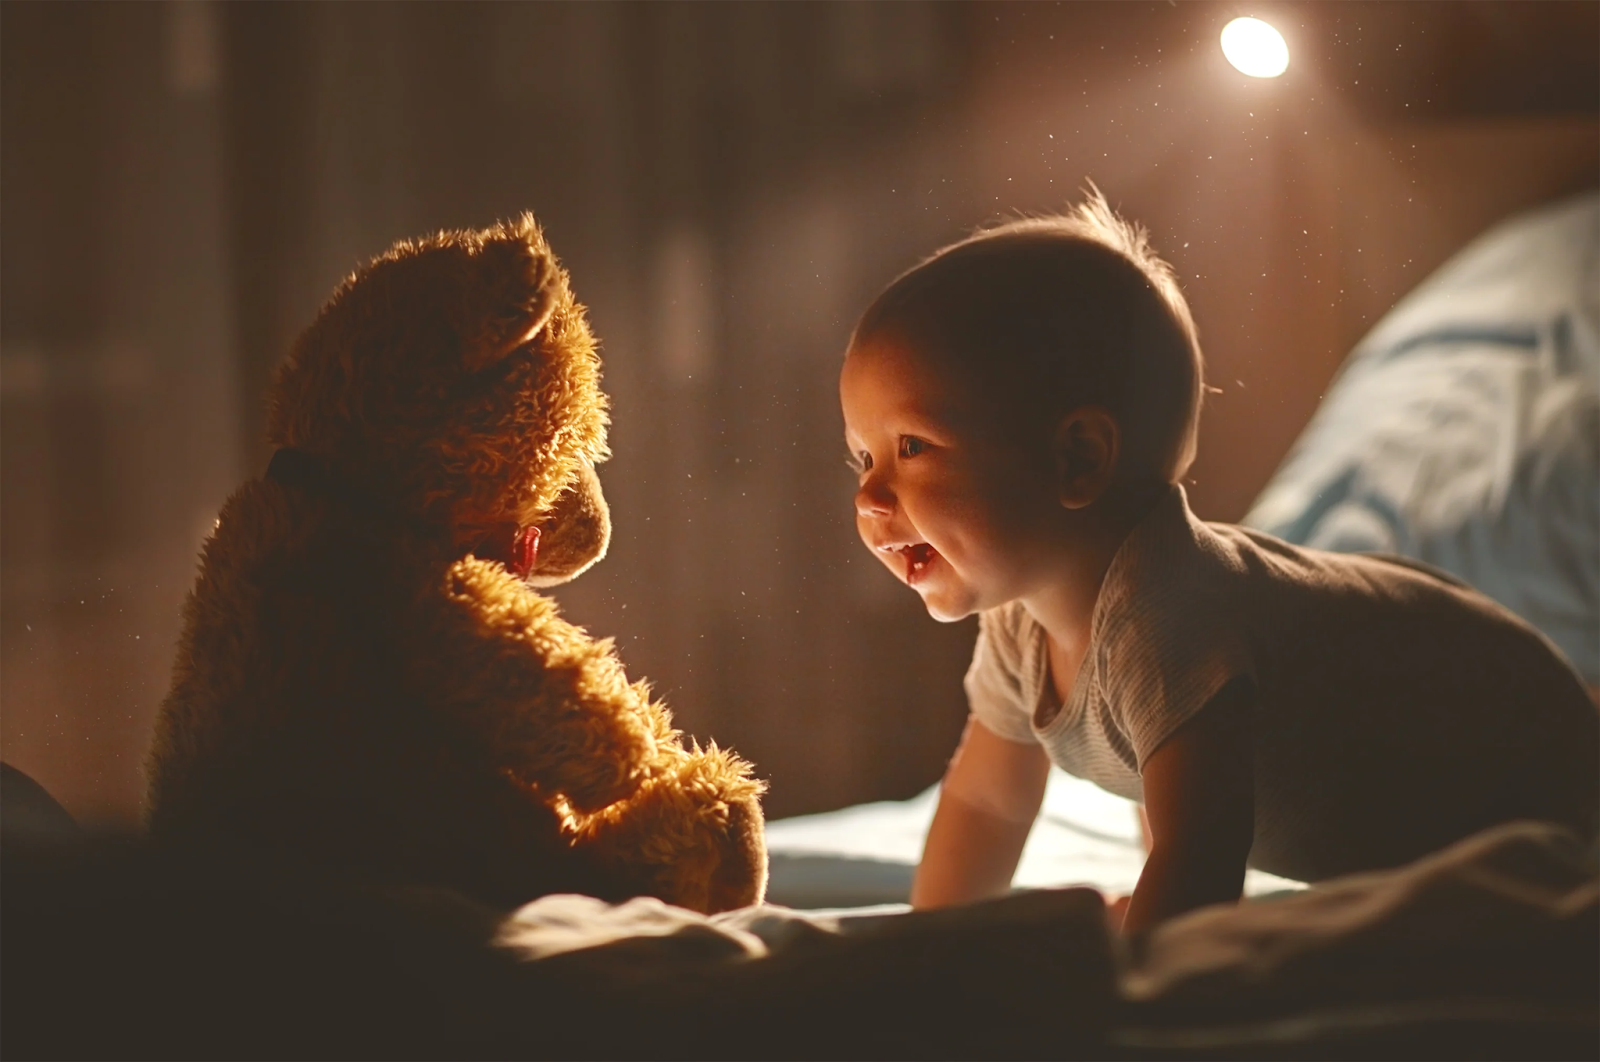 A cute baby crawling, happily towards an adorable cuddly bear. 